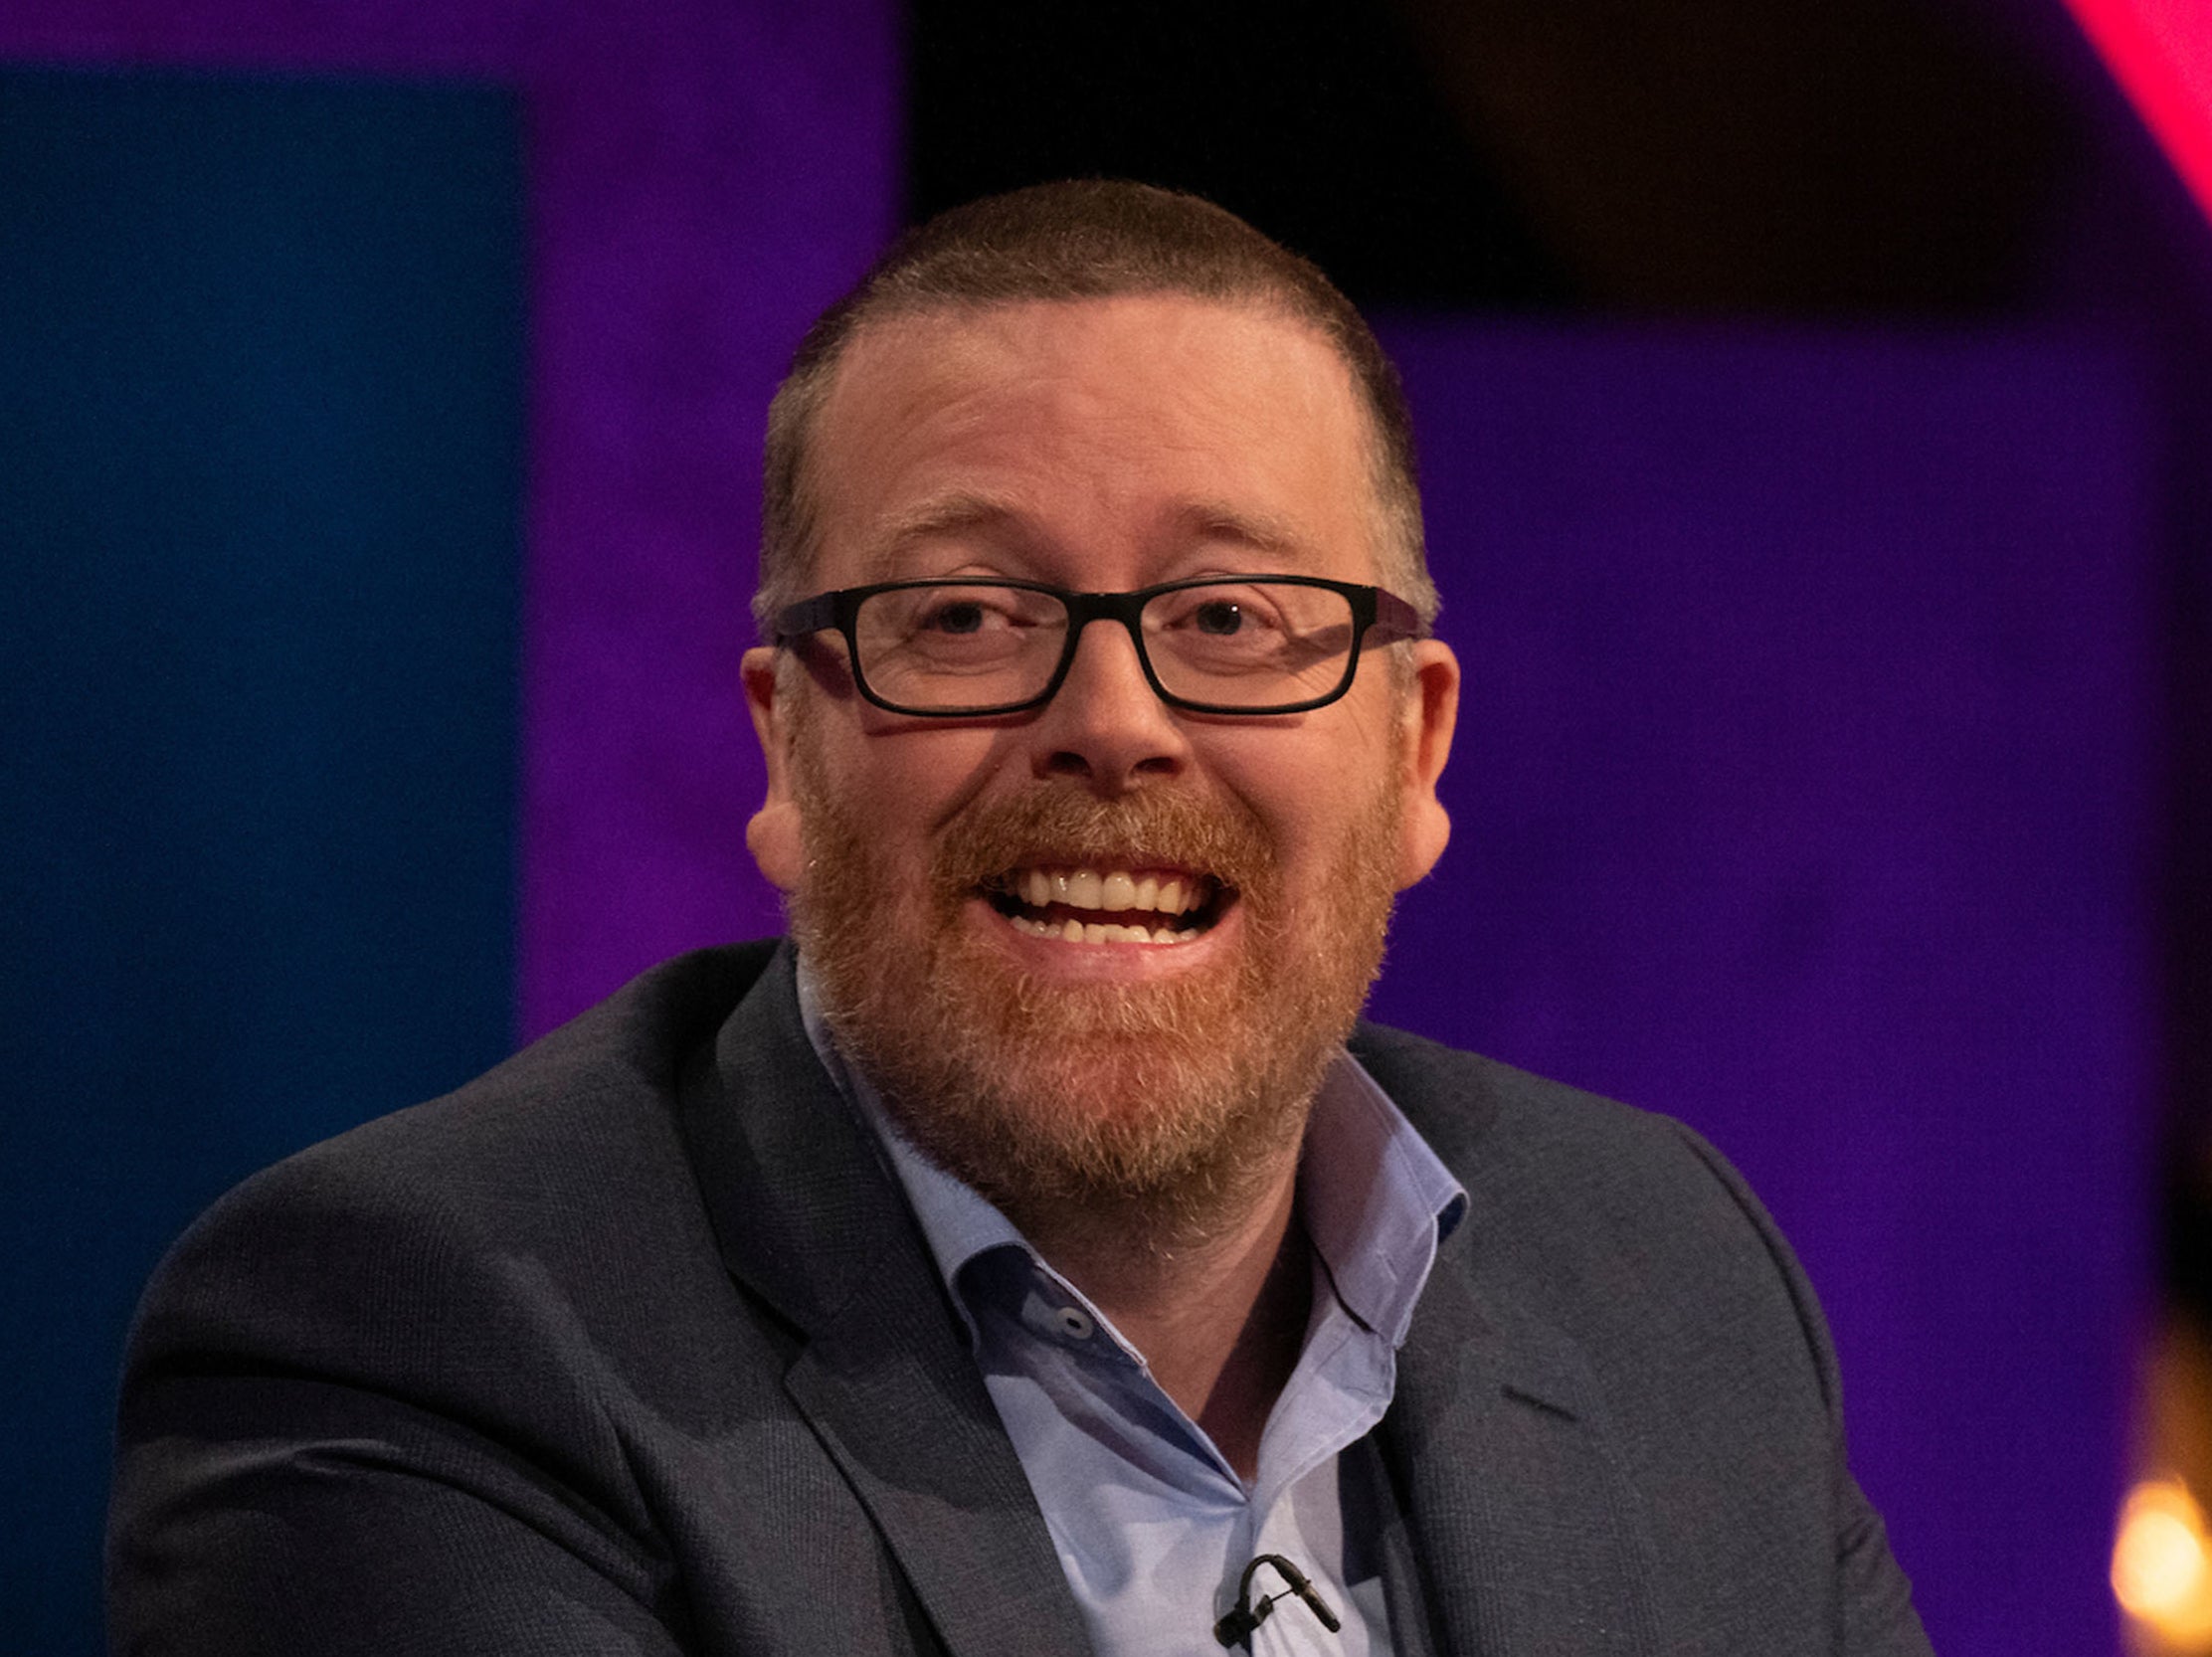 Frankie Boyle, host of ‘New World Order’ on BBC Two